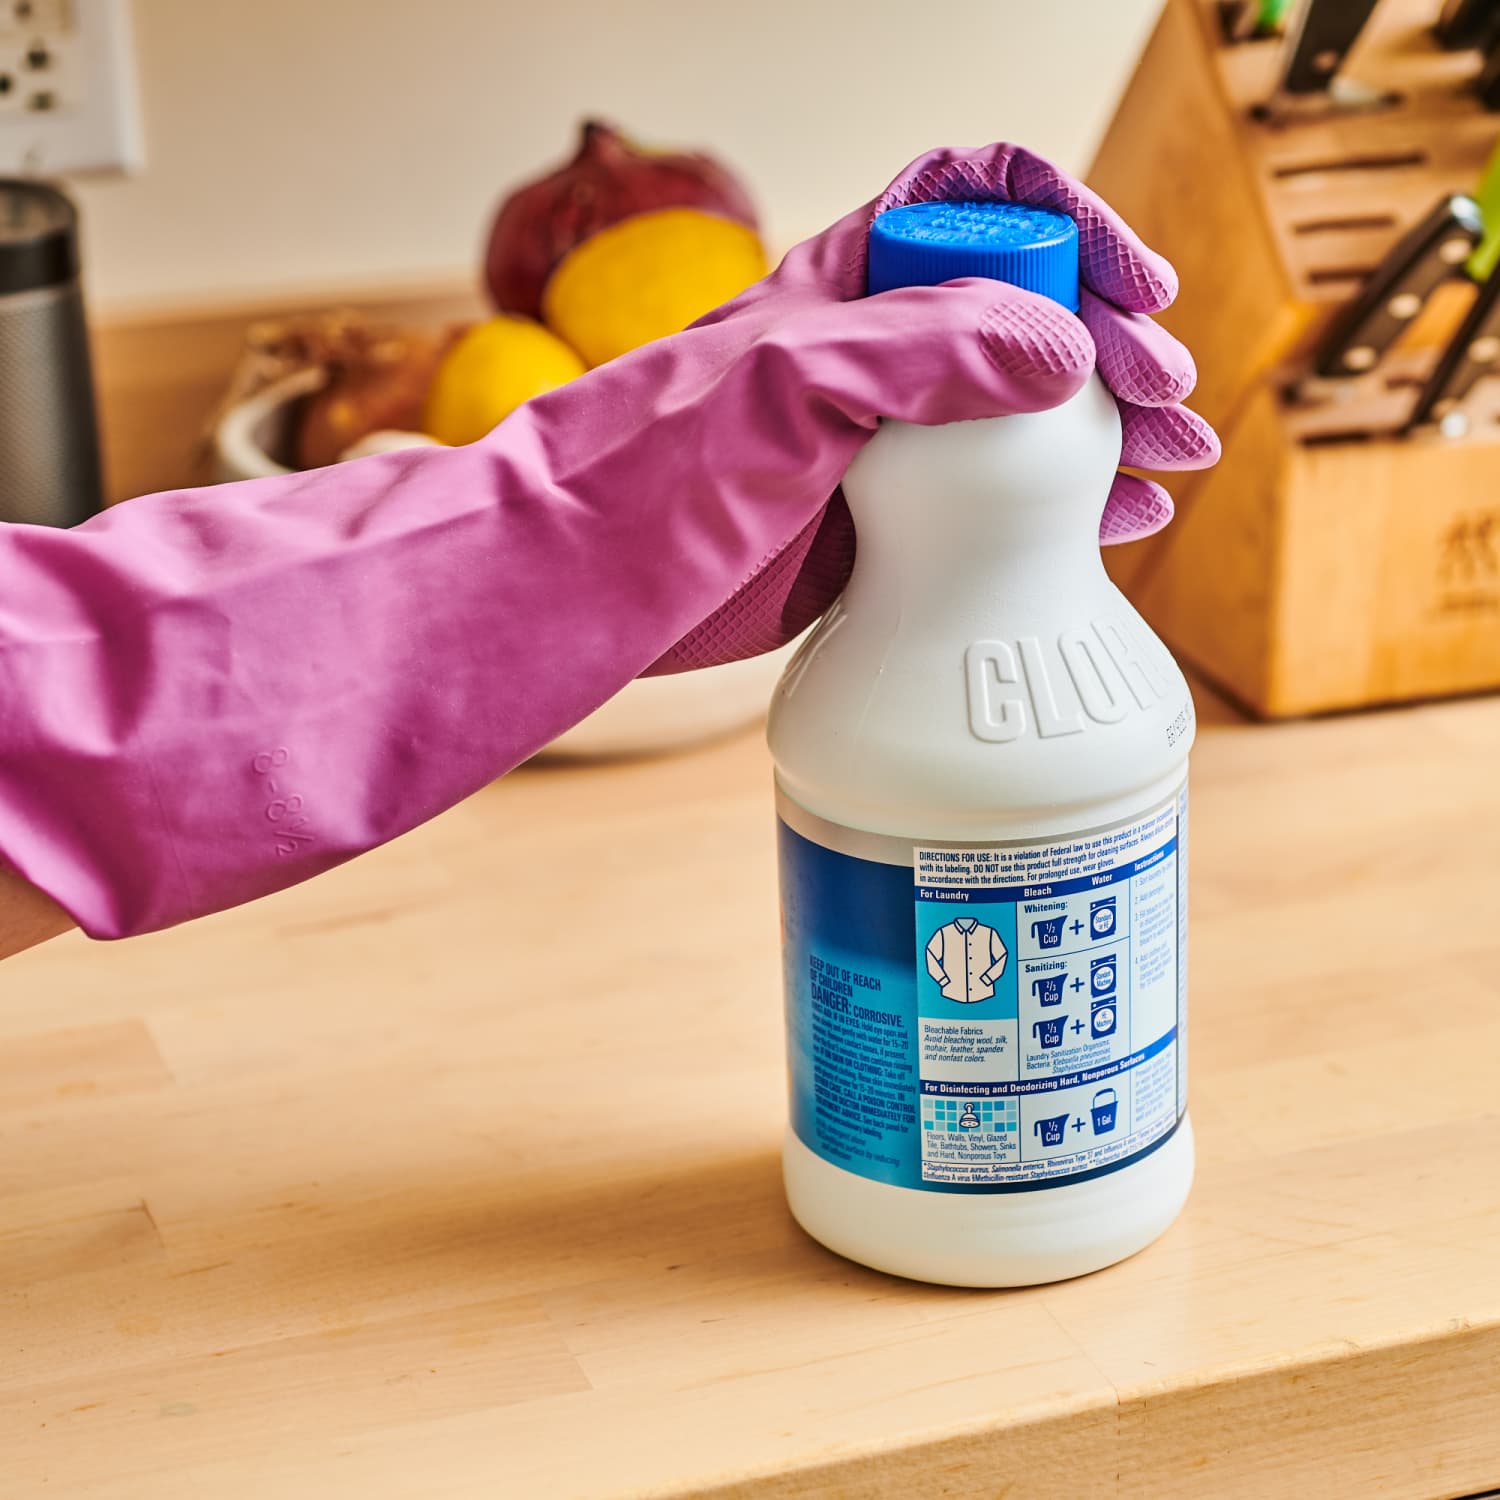 How to Use Bleach in Laundry